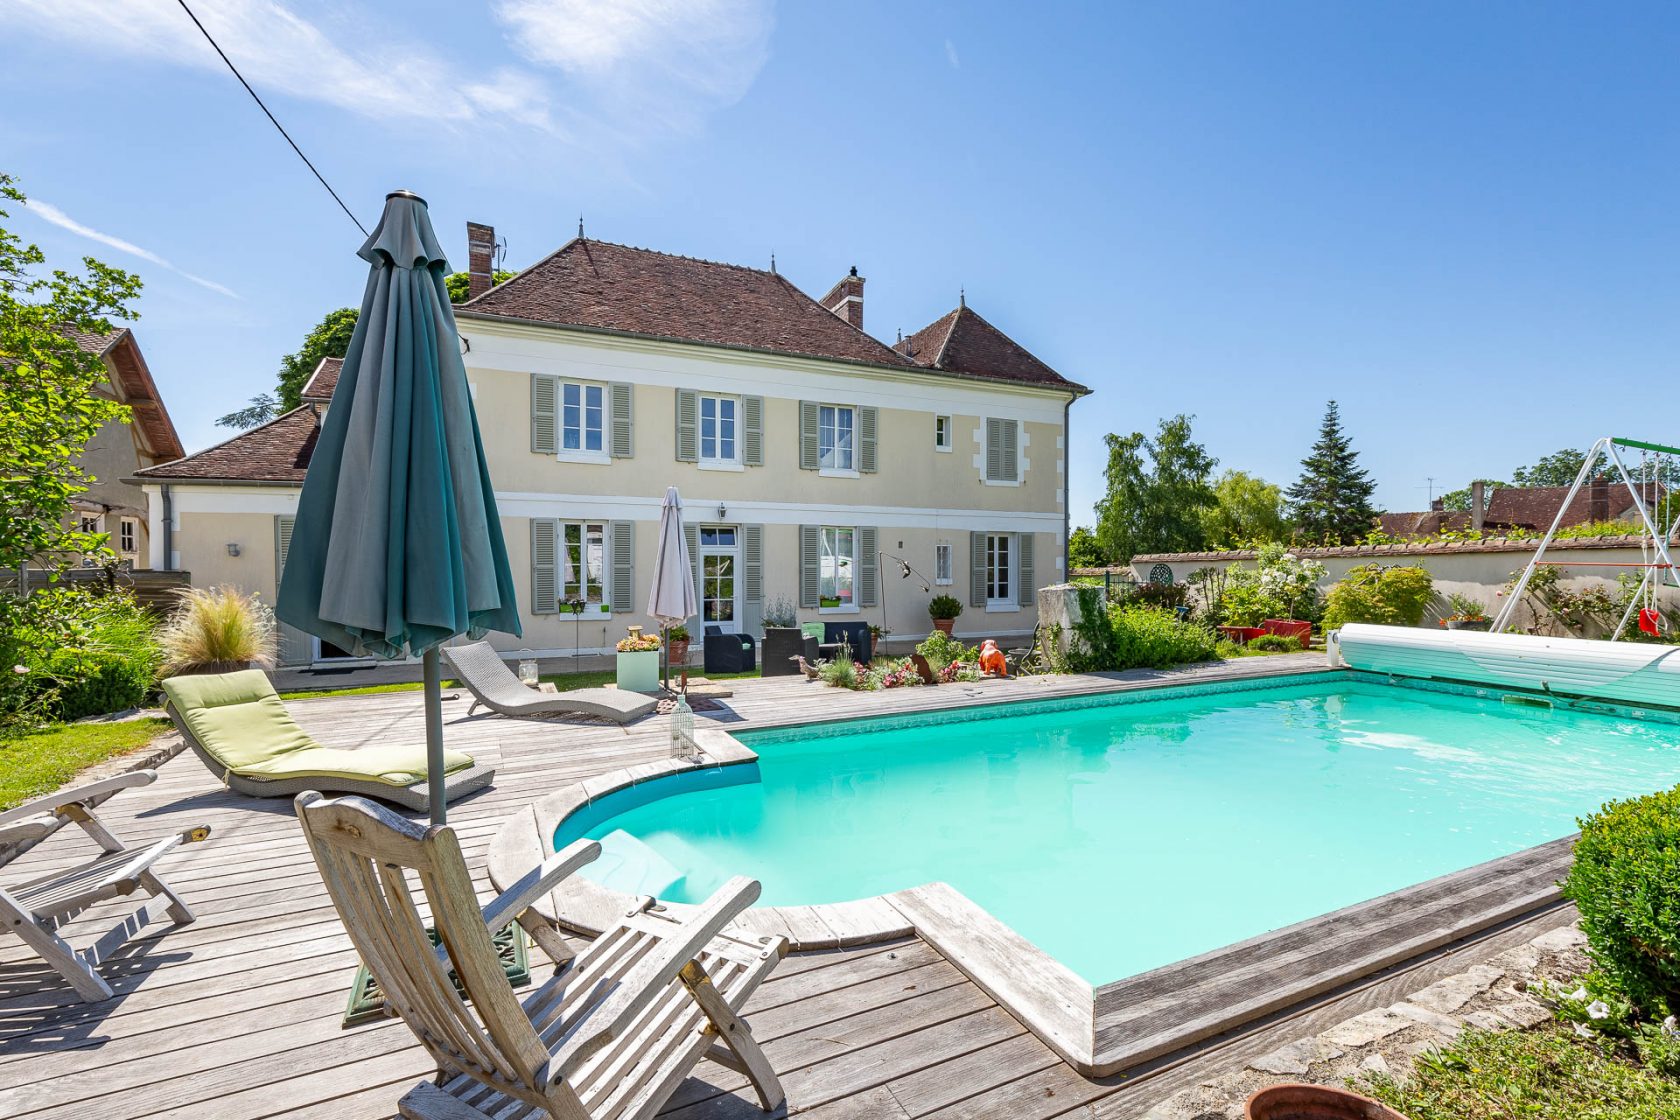 Beautiful property with garden, swimming pool and outbuildings